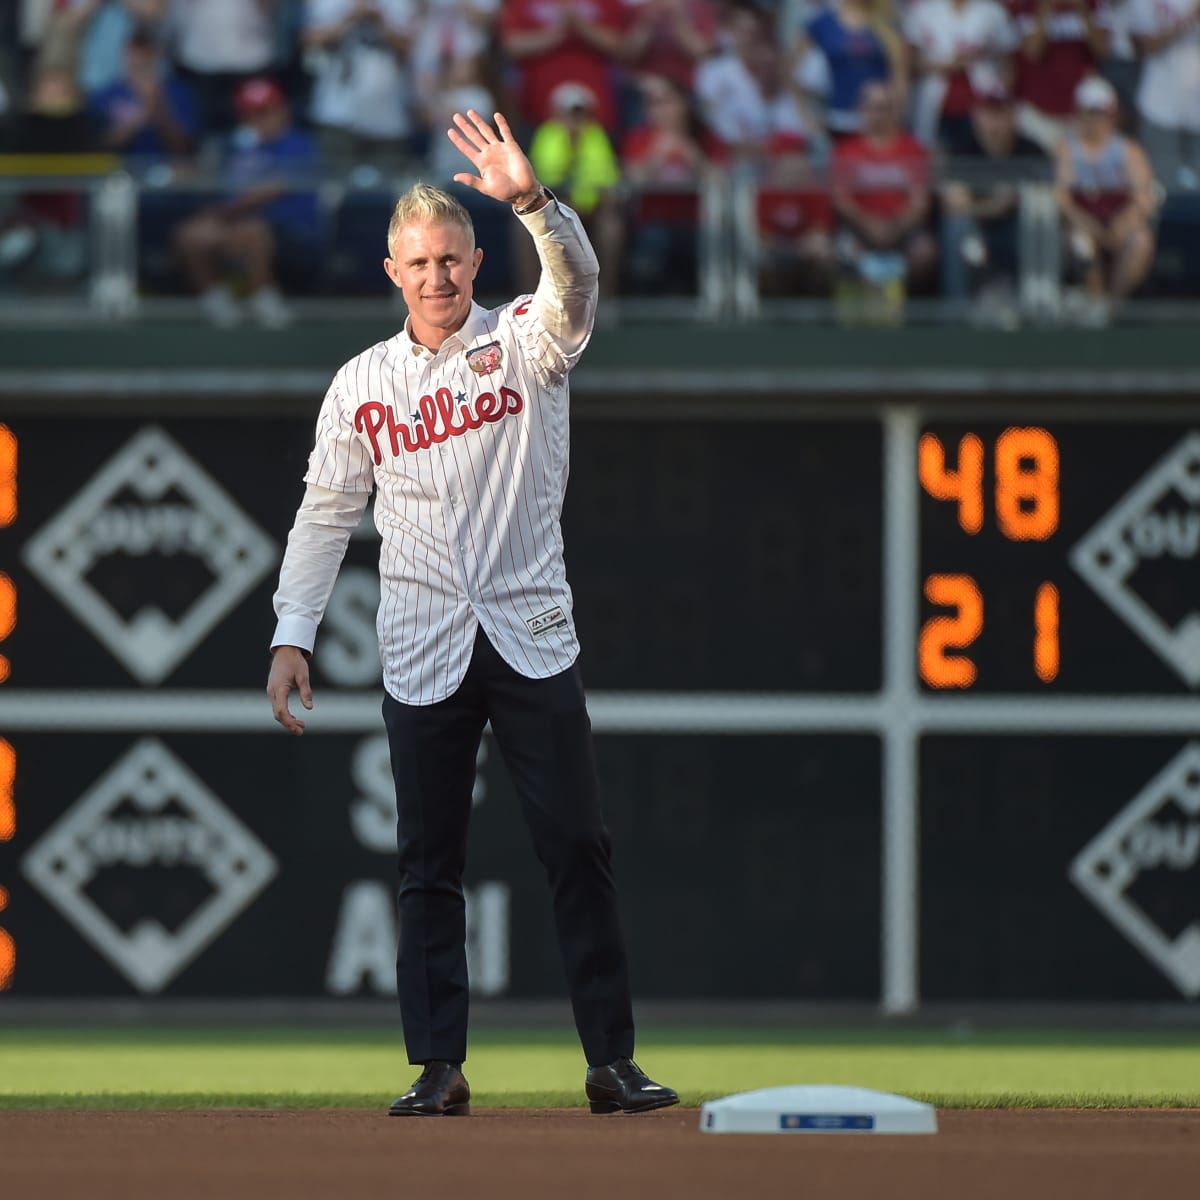 As Chase Utley Departs for Dodgers, a Look at the Phillies' Fall